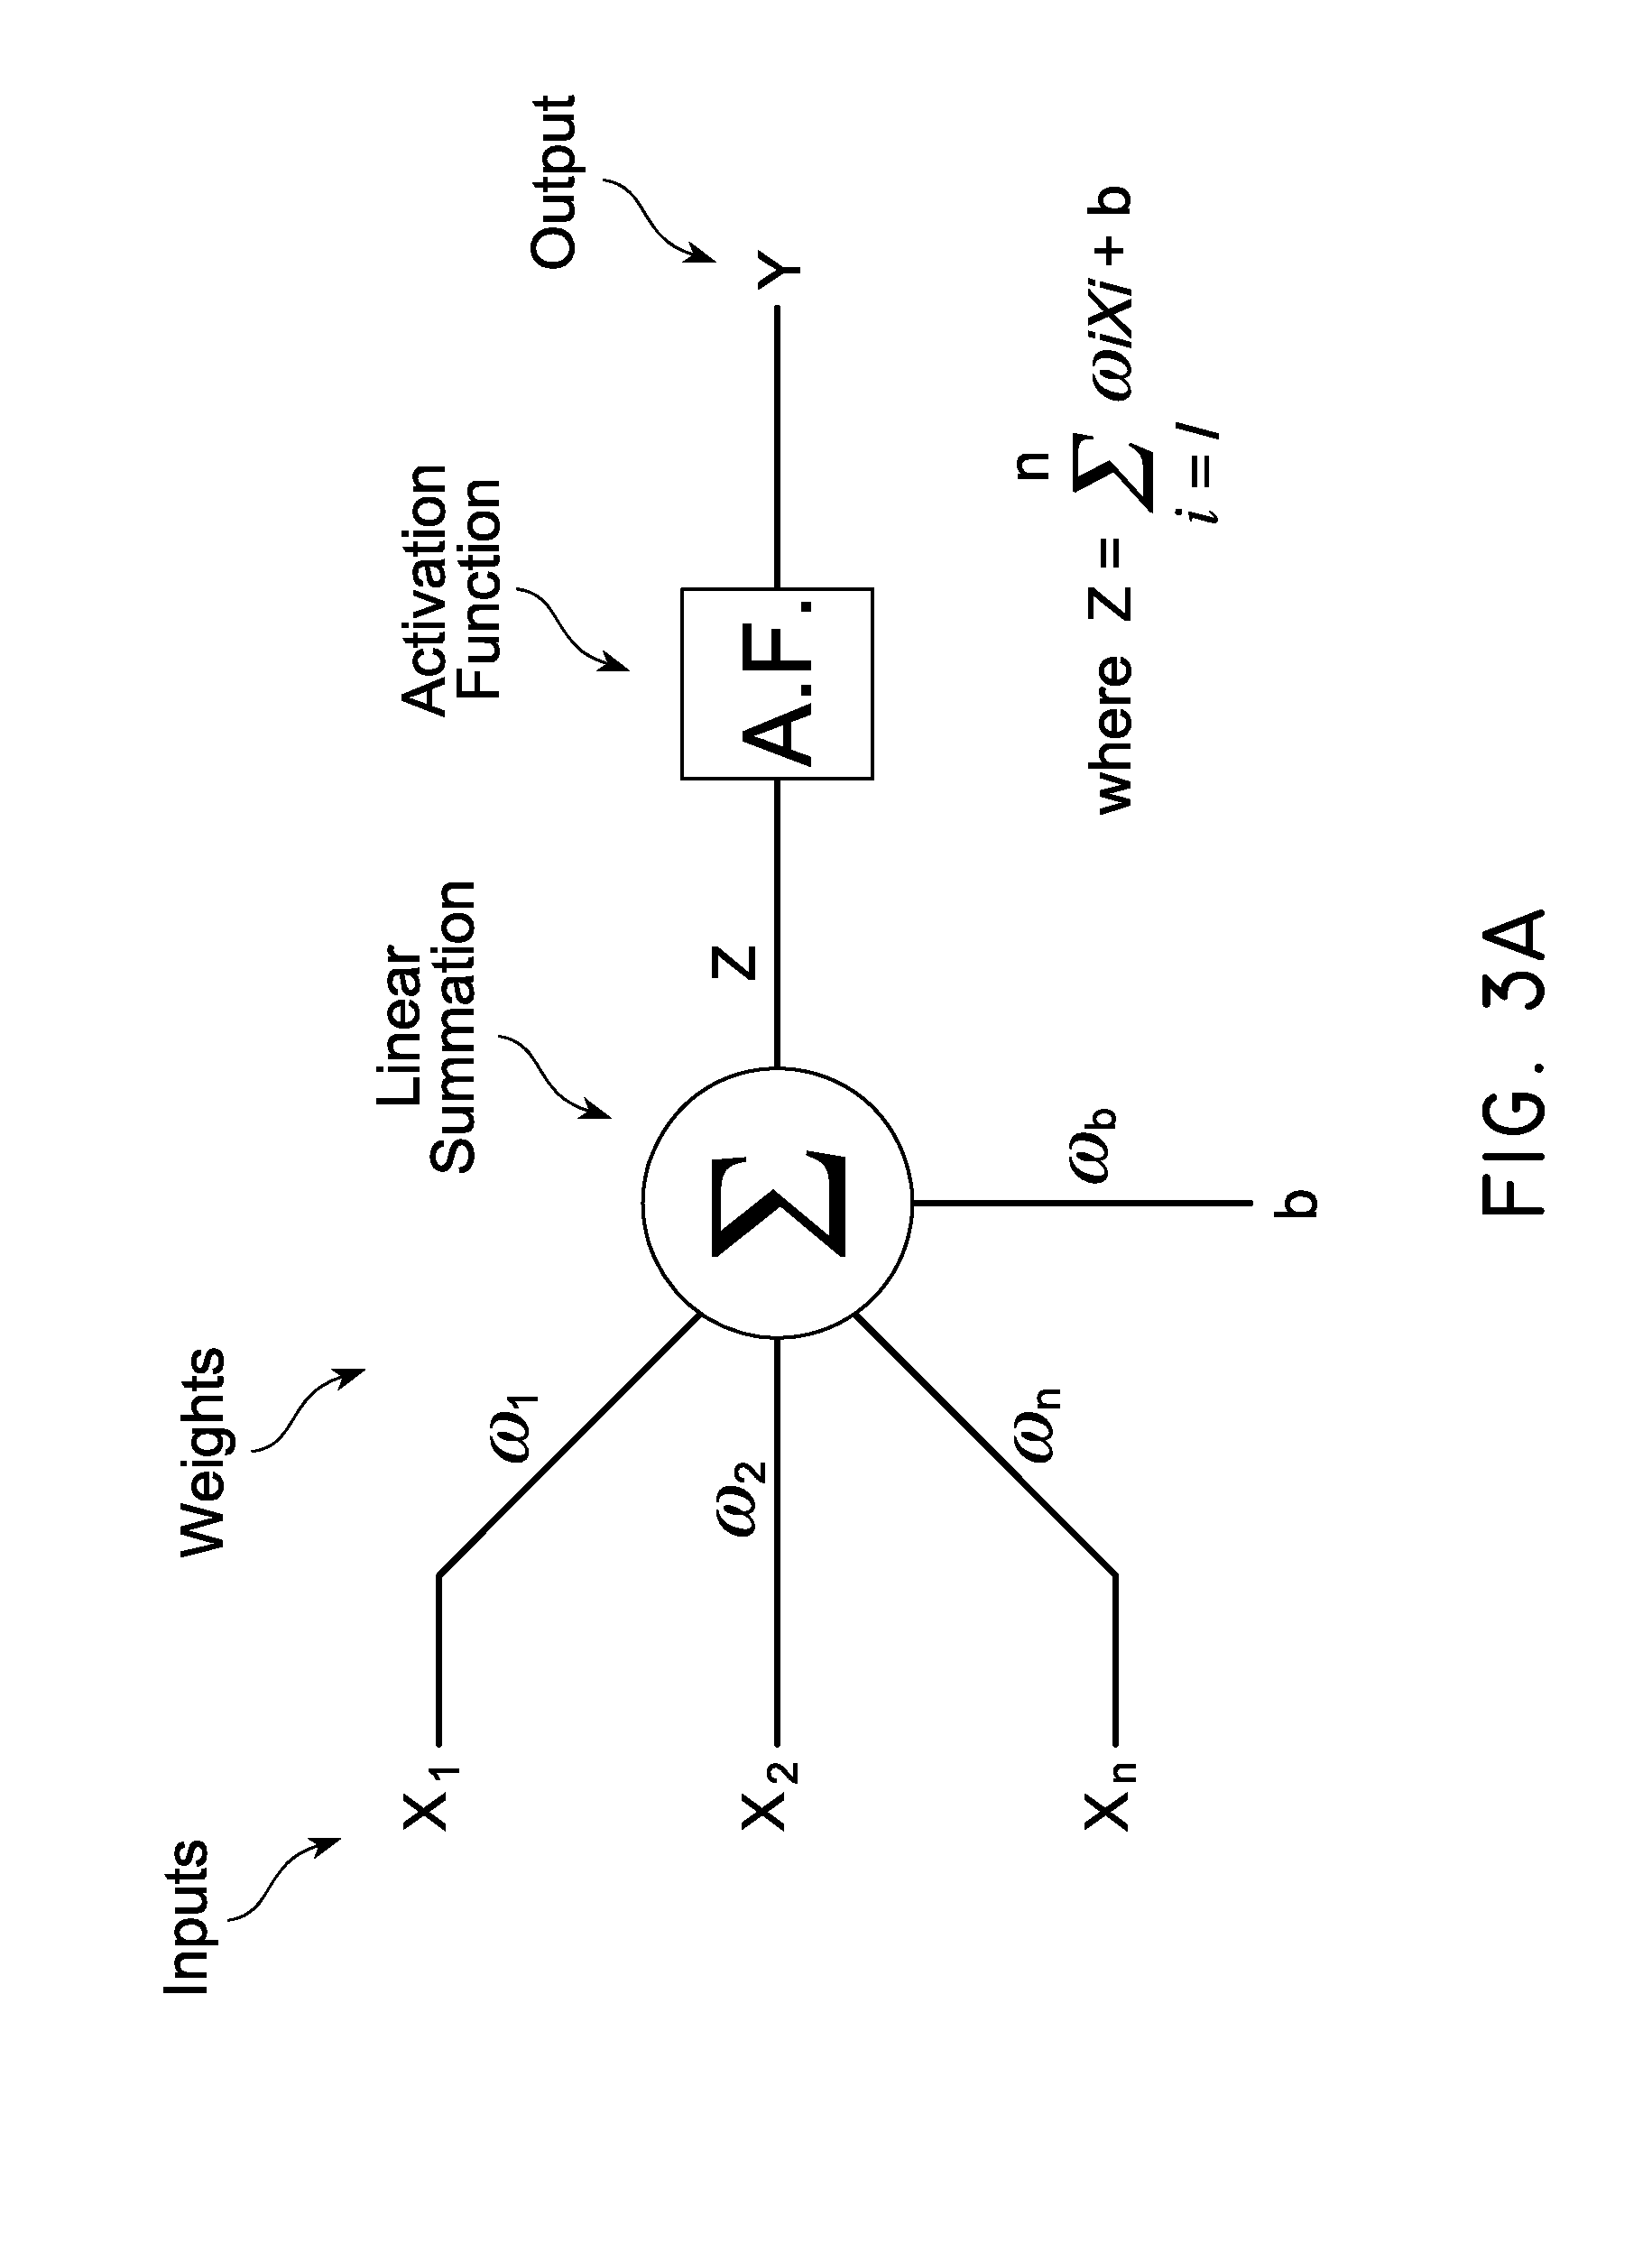 Neural network frequency control and compensation of control voltage linearity